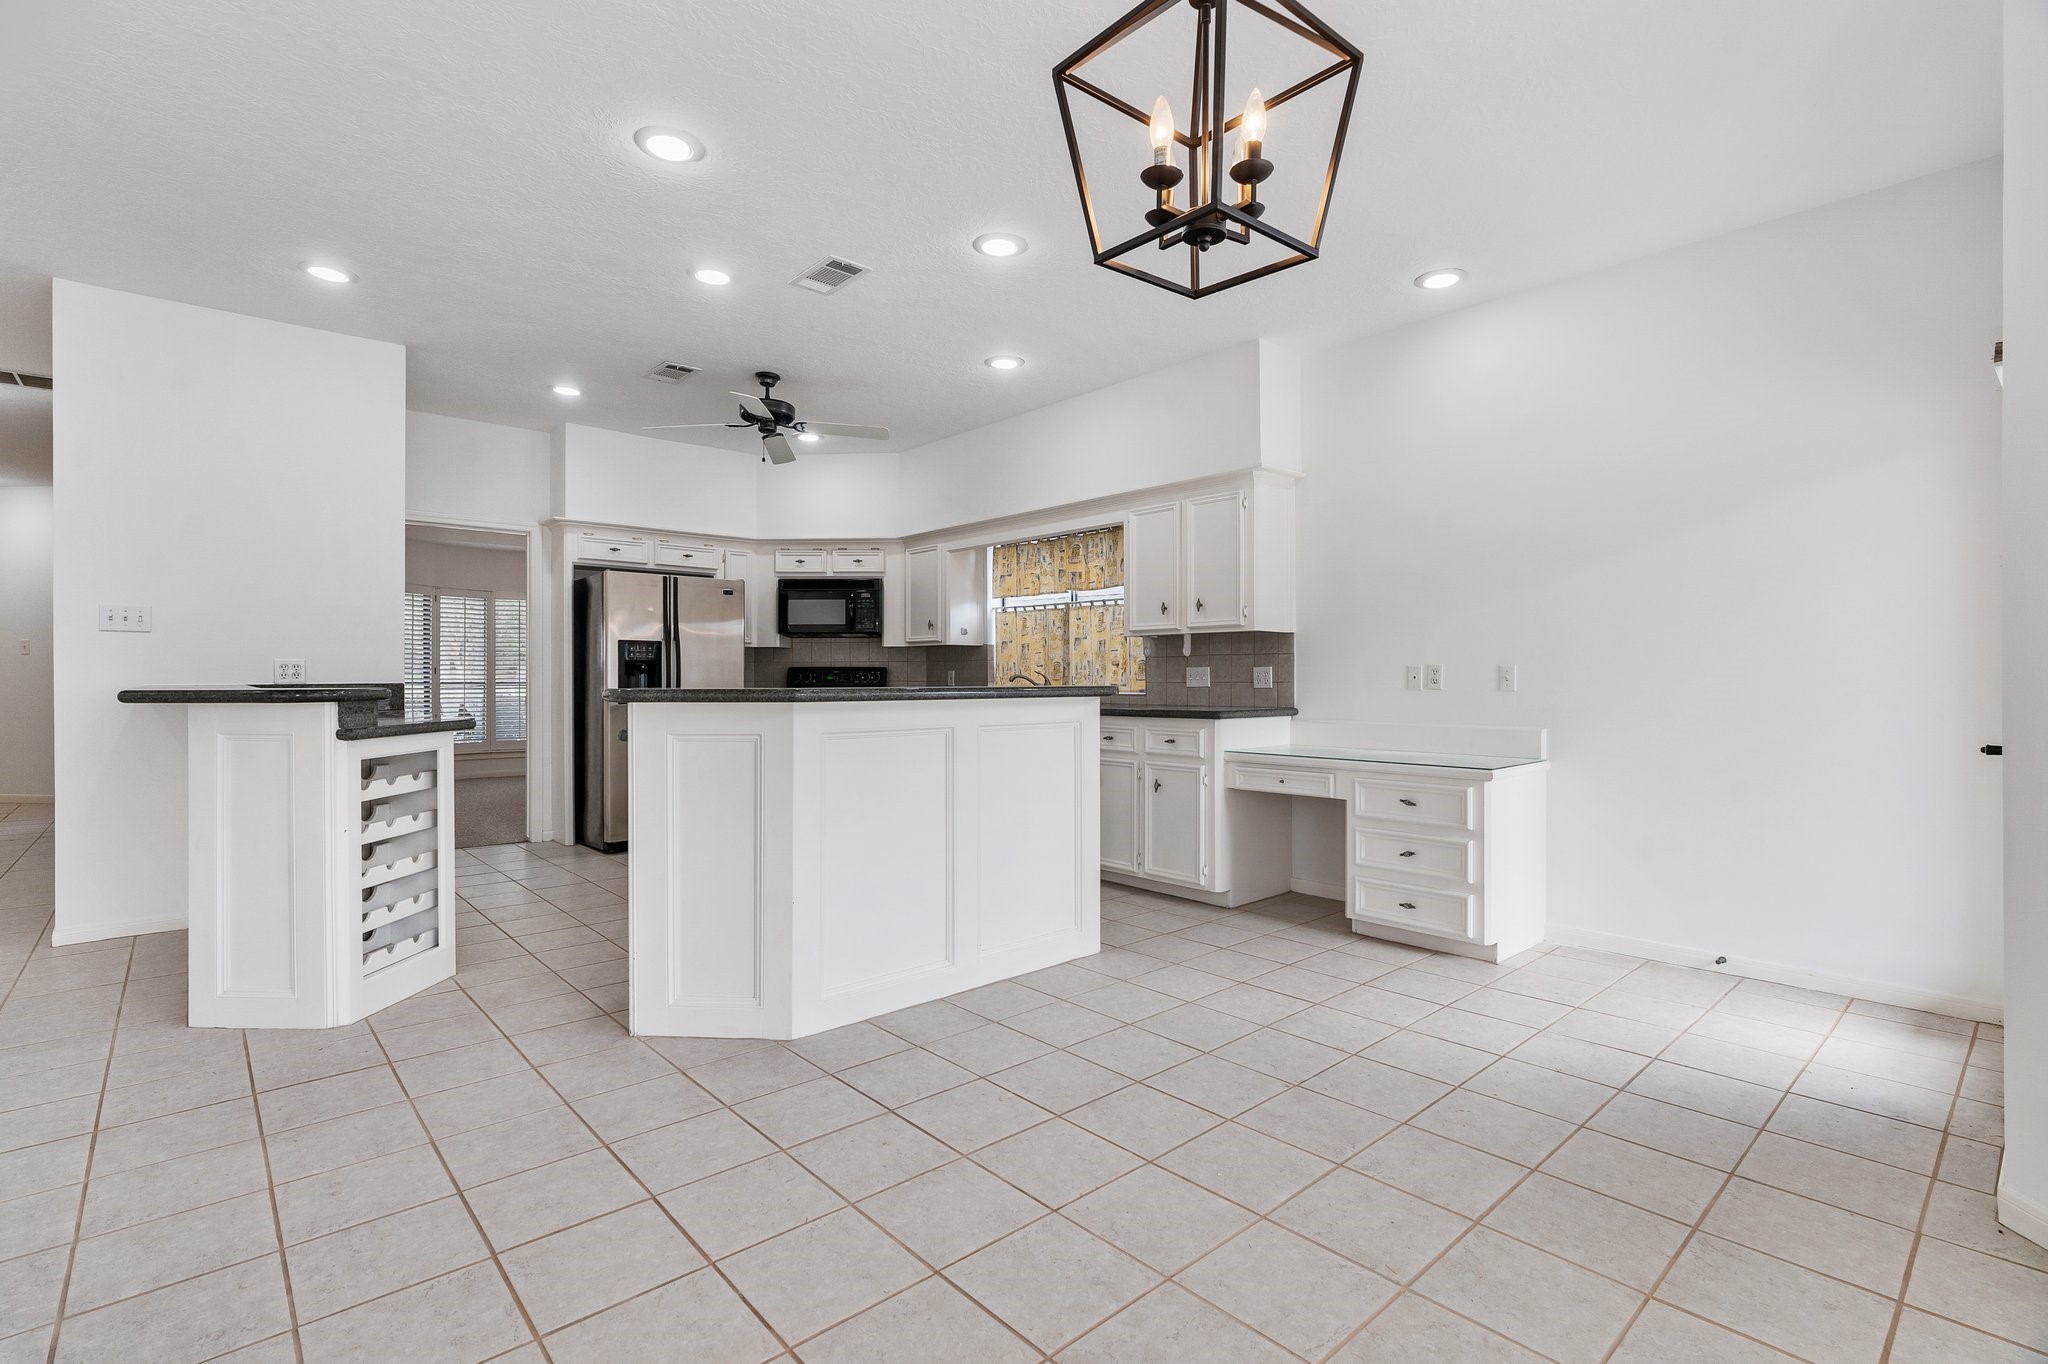 Open floor plan for kitchen, breakfast and family rooms. The kitchen is surrounded by two bar areas, perfect to keep the cook company! There is a convenient desk area also.